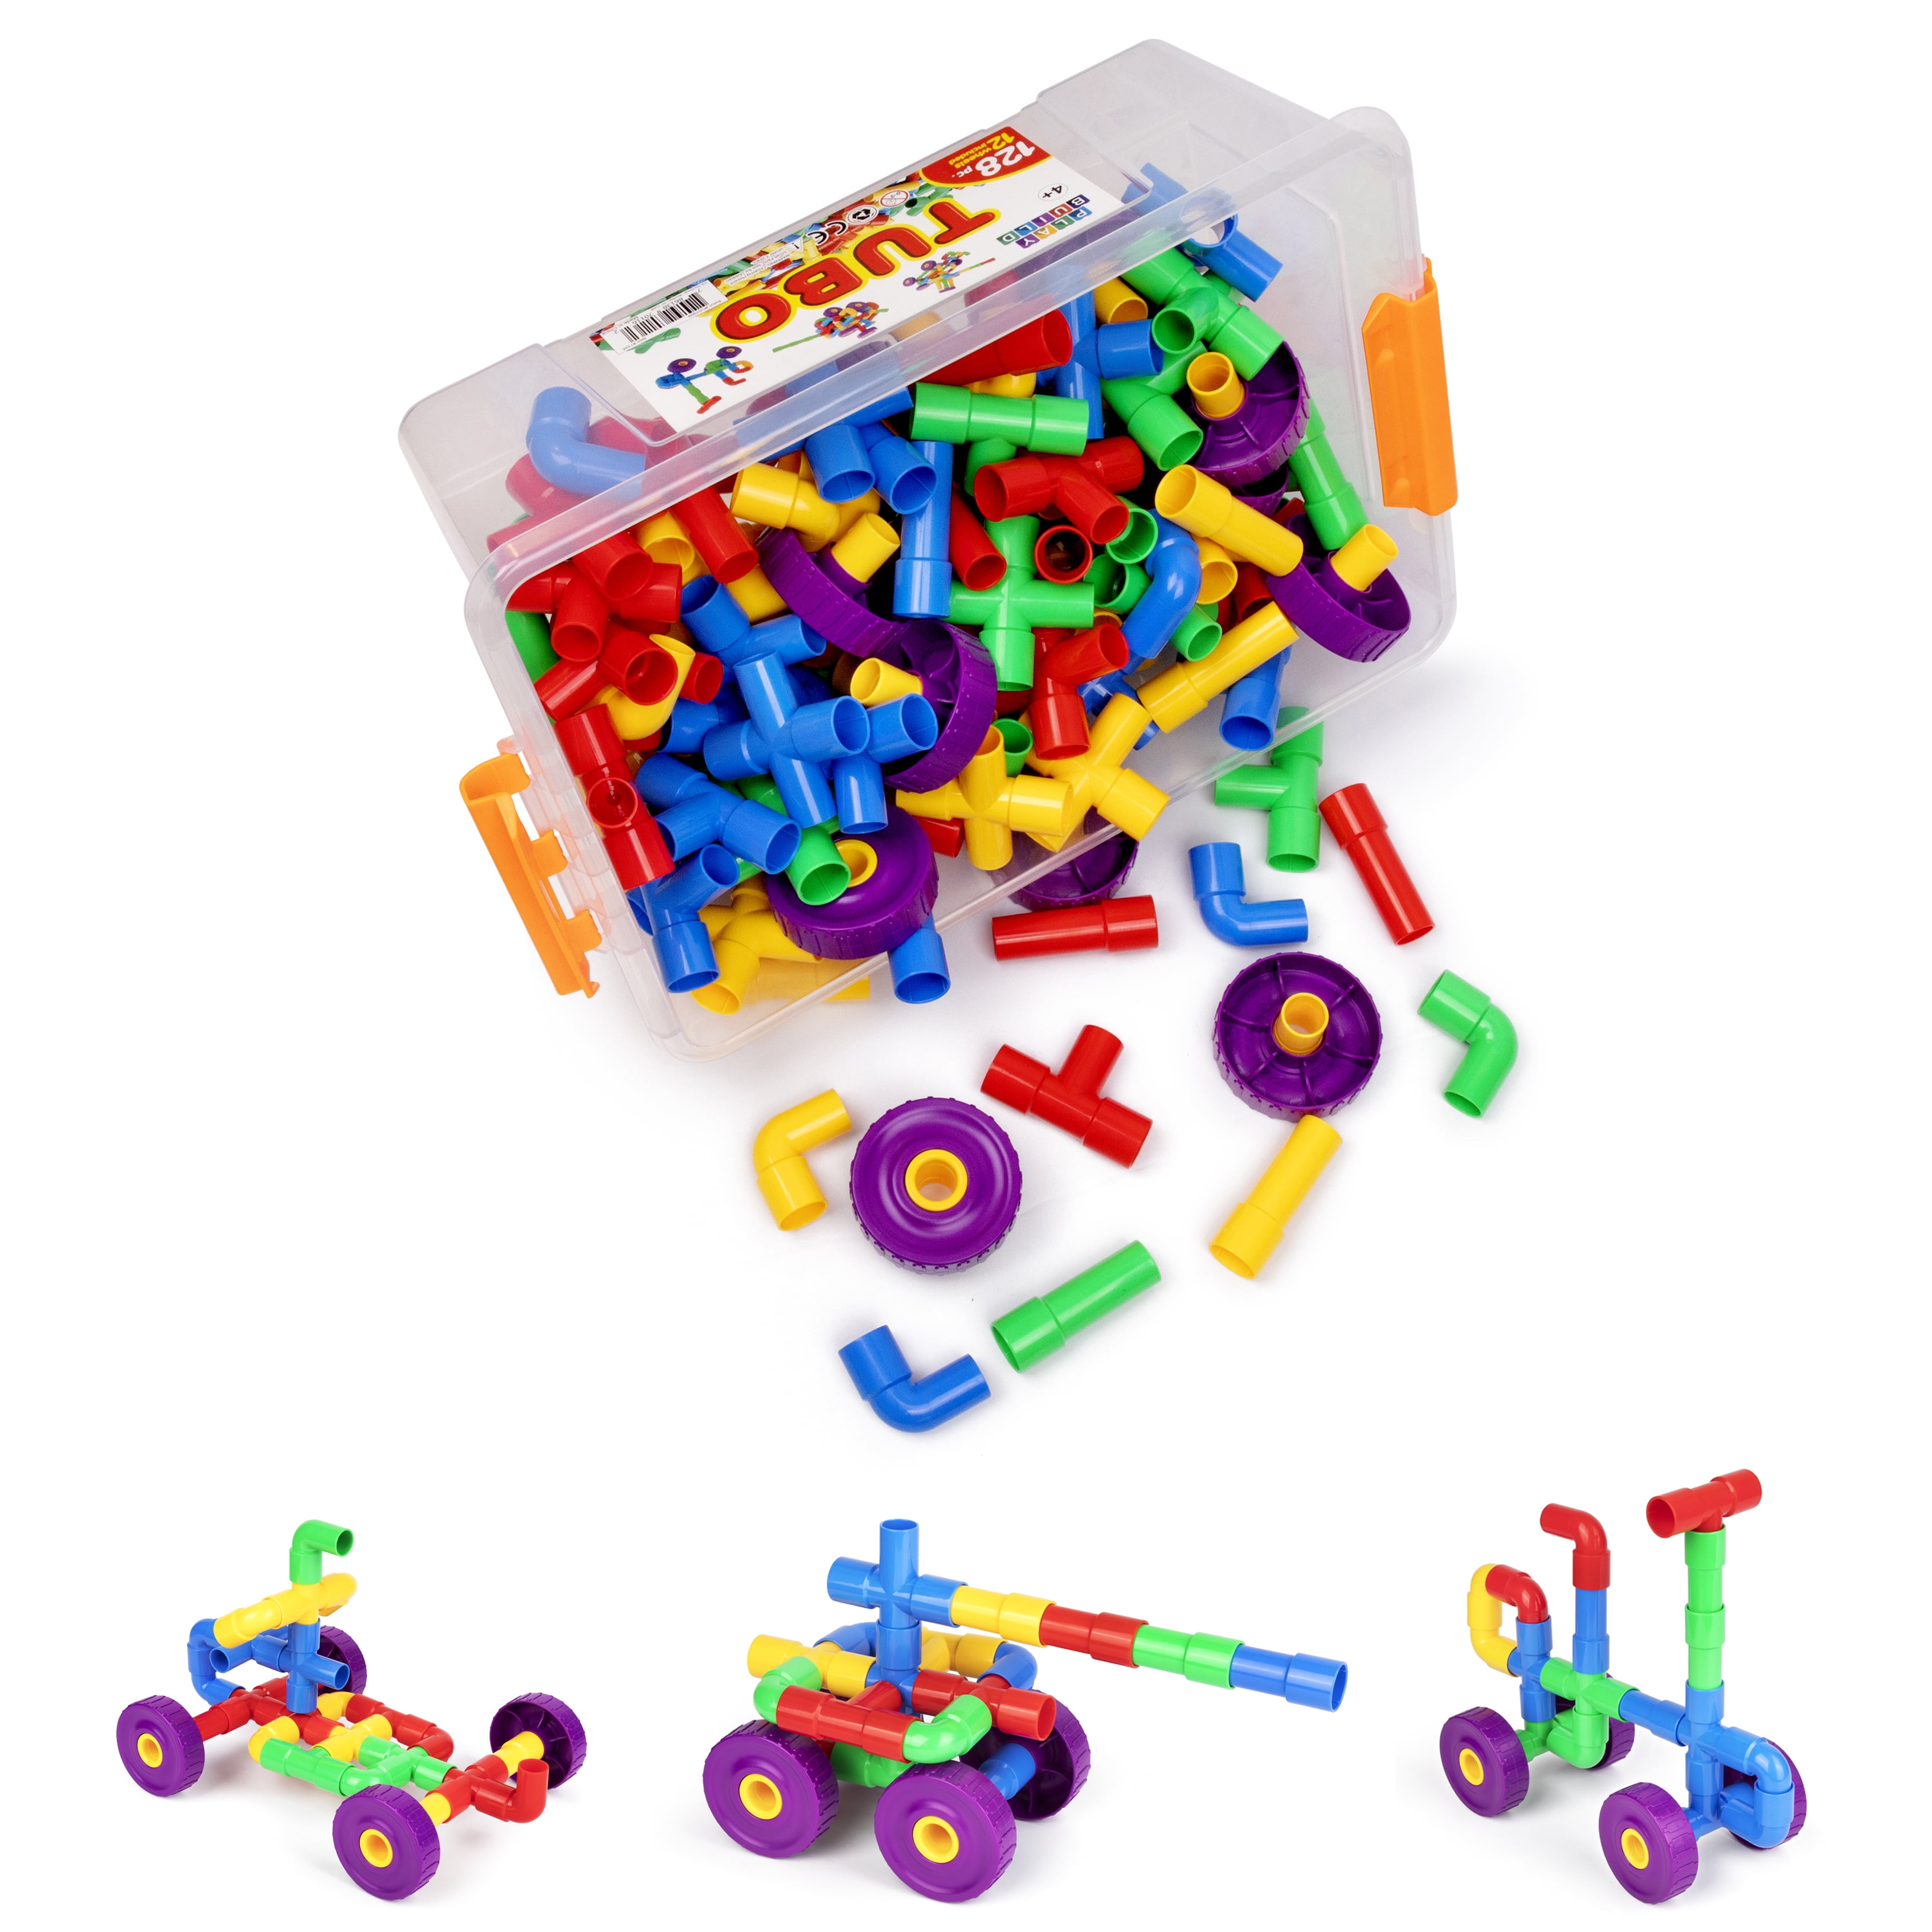 connect construction toy